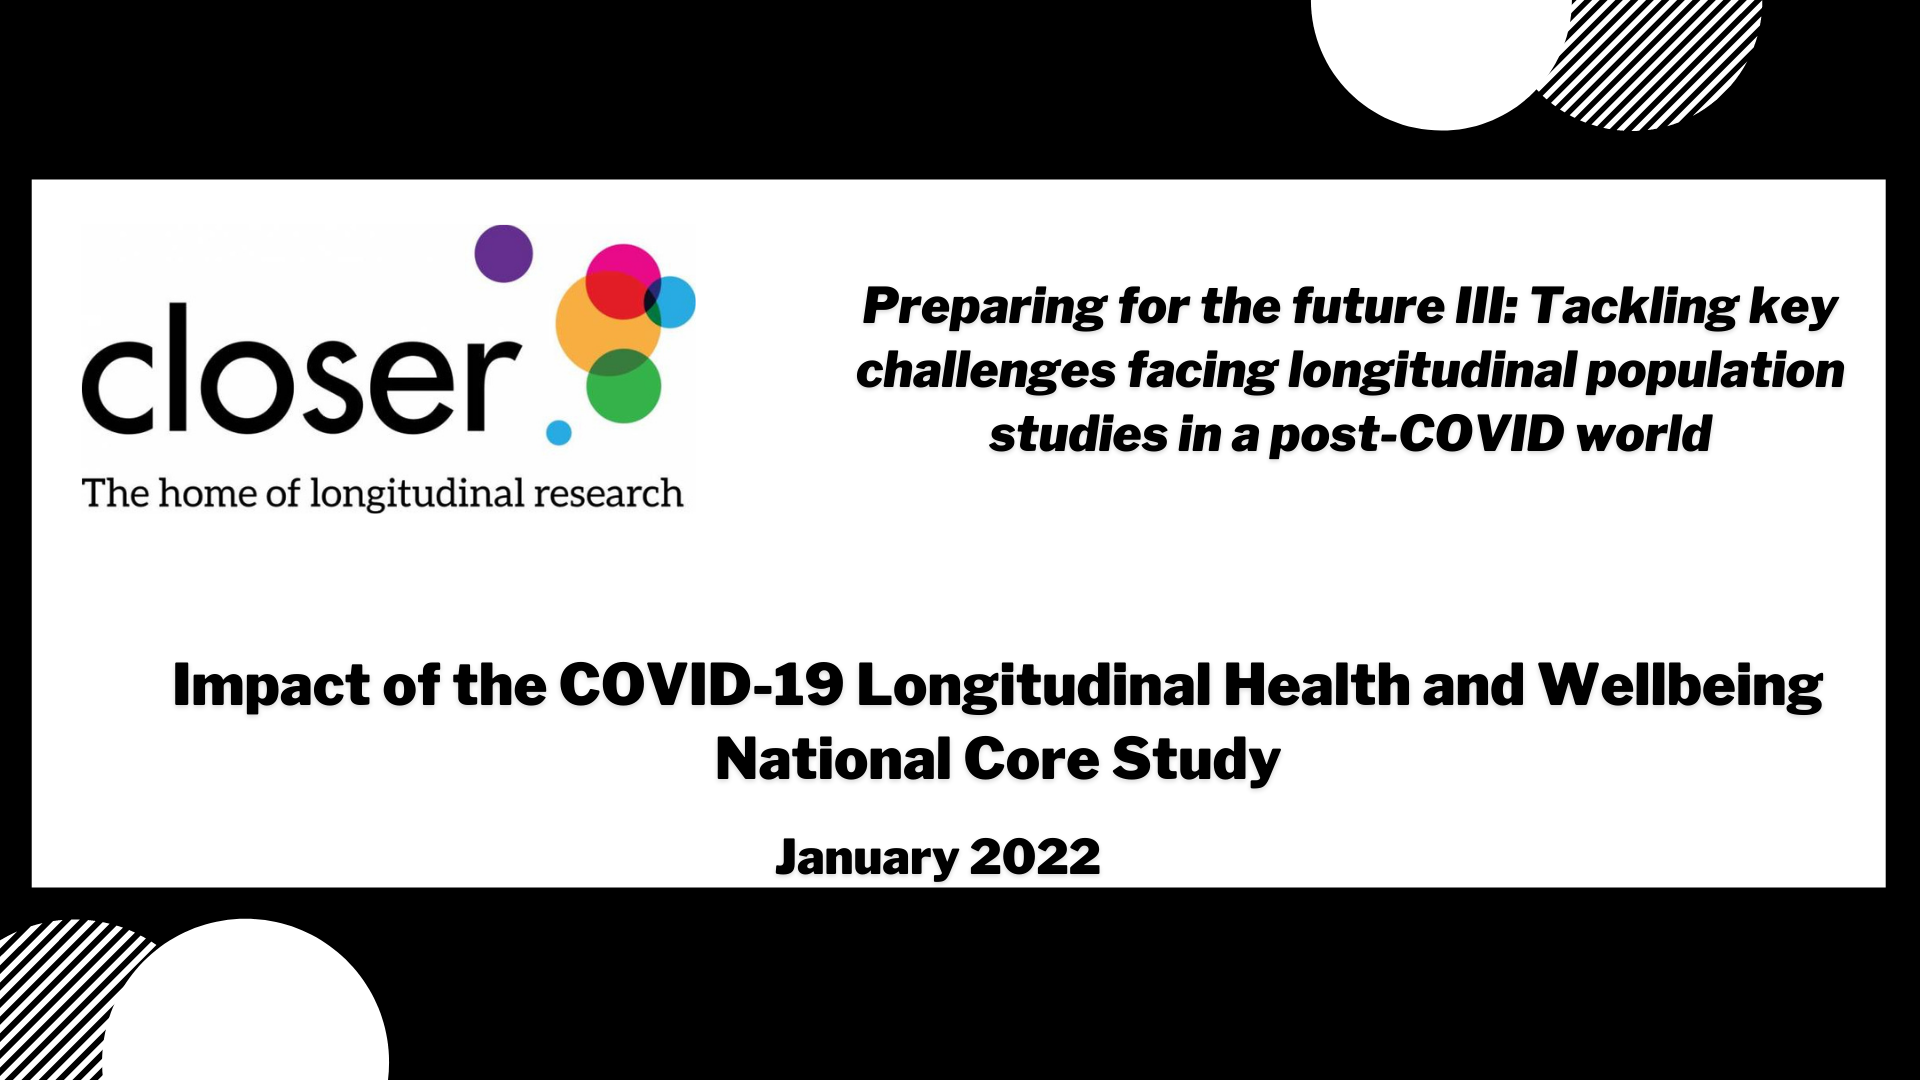 Impact of the COVID19 LHW national Core Study 2021